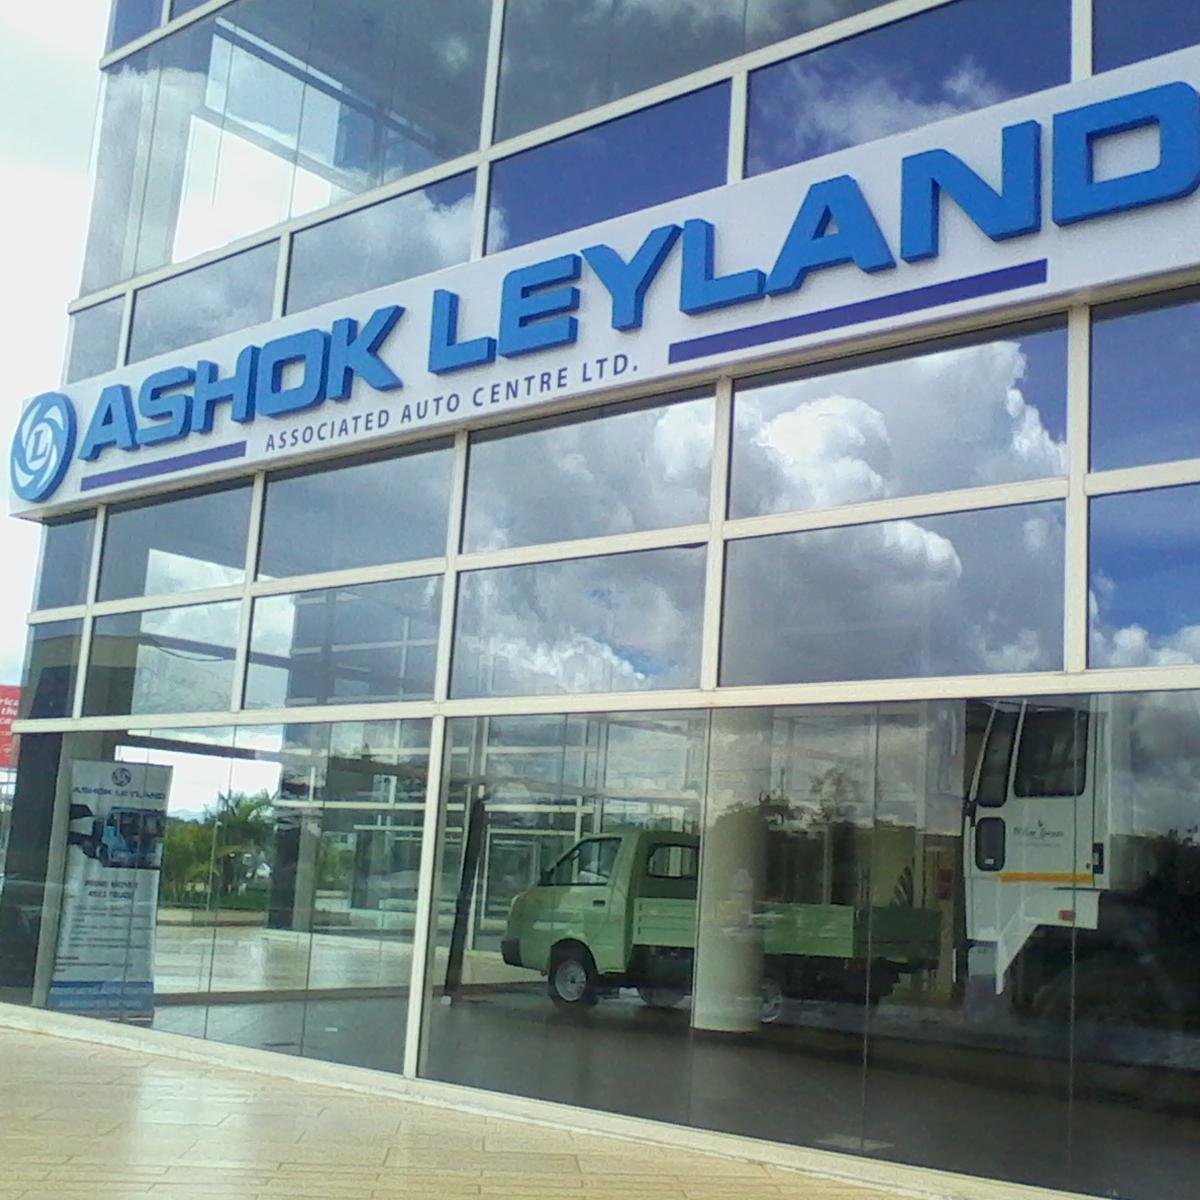 Associated Auto Centre Limited is the local franchise holder for Ashok Leyland trucks and buses in Kenya with a countrywide branch and dealer network.